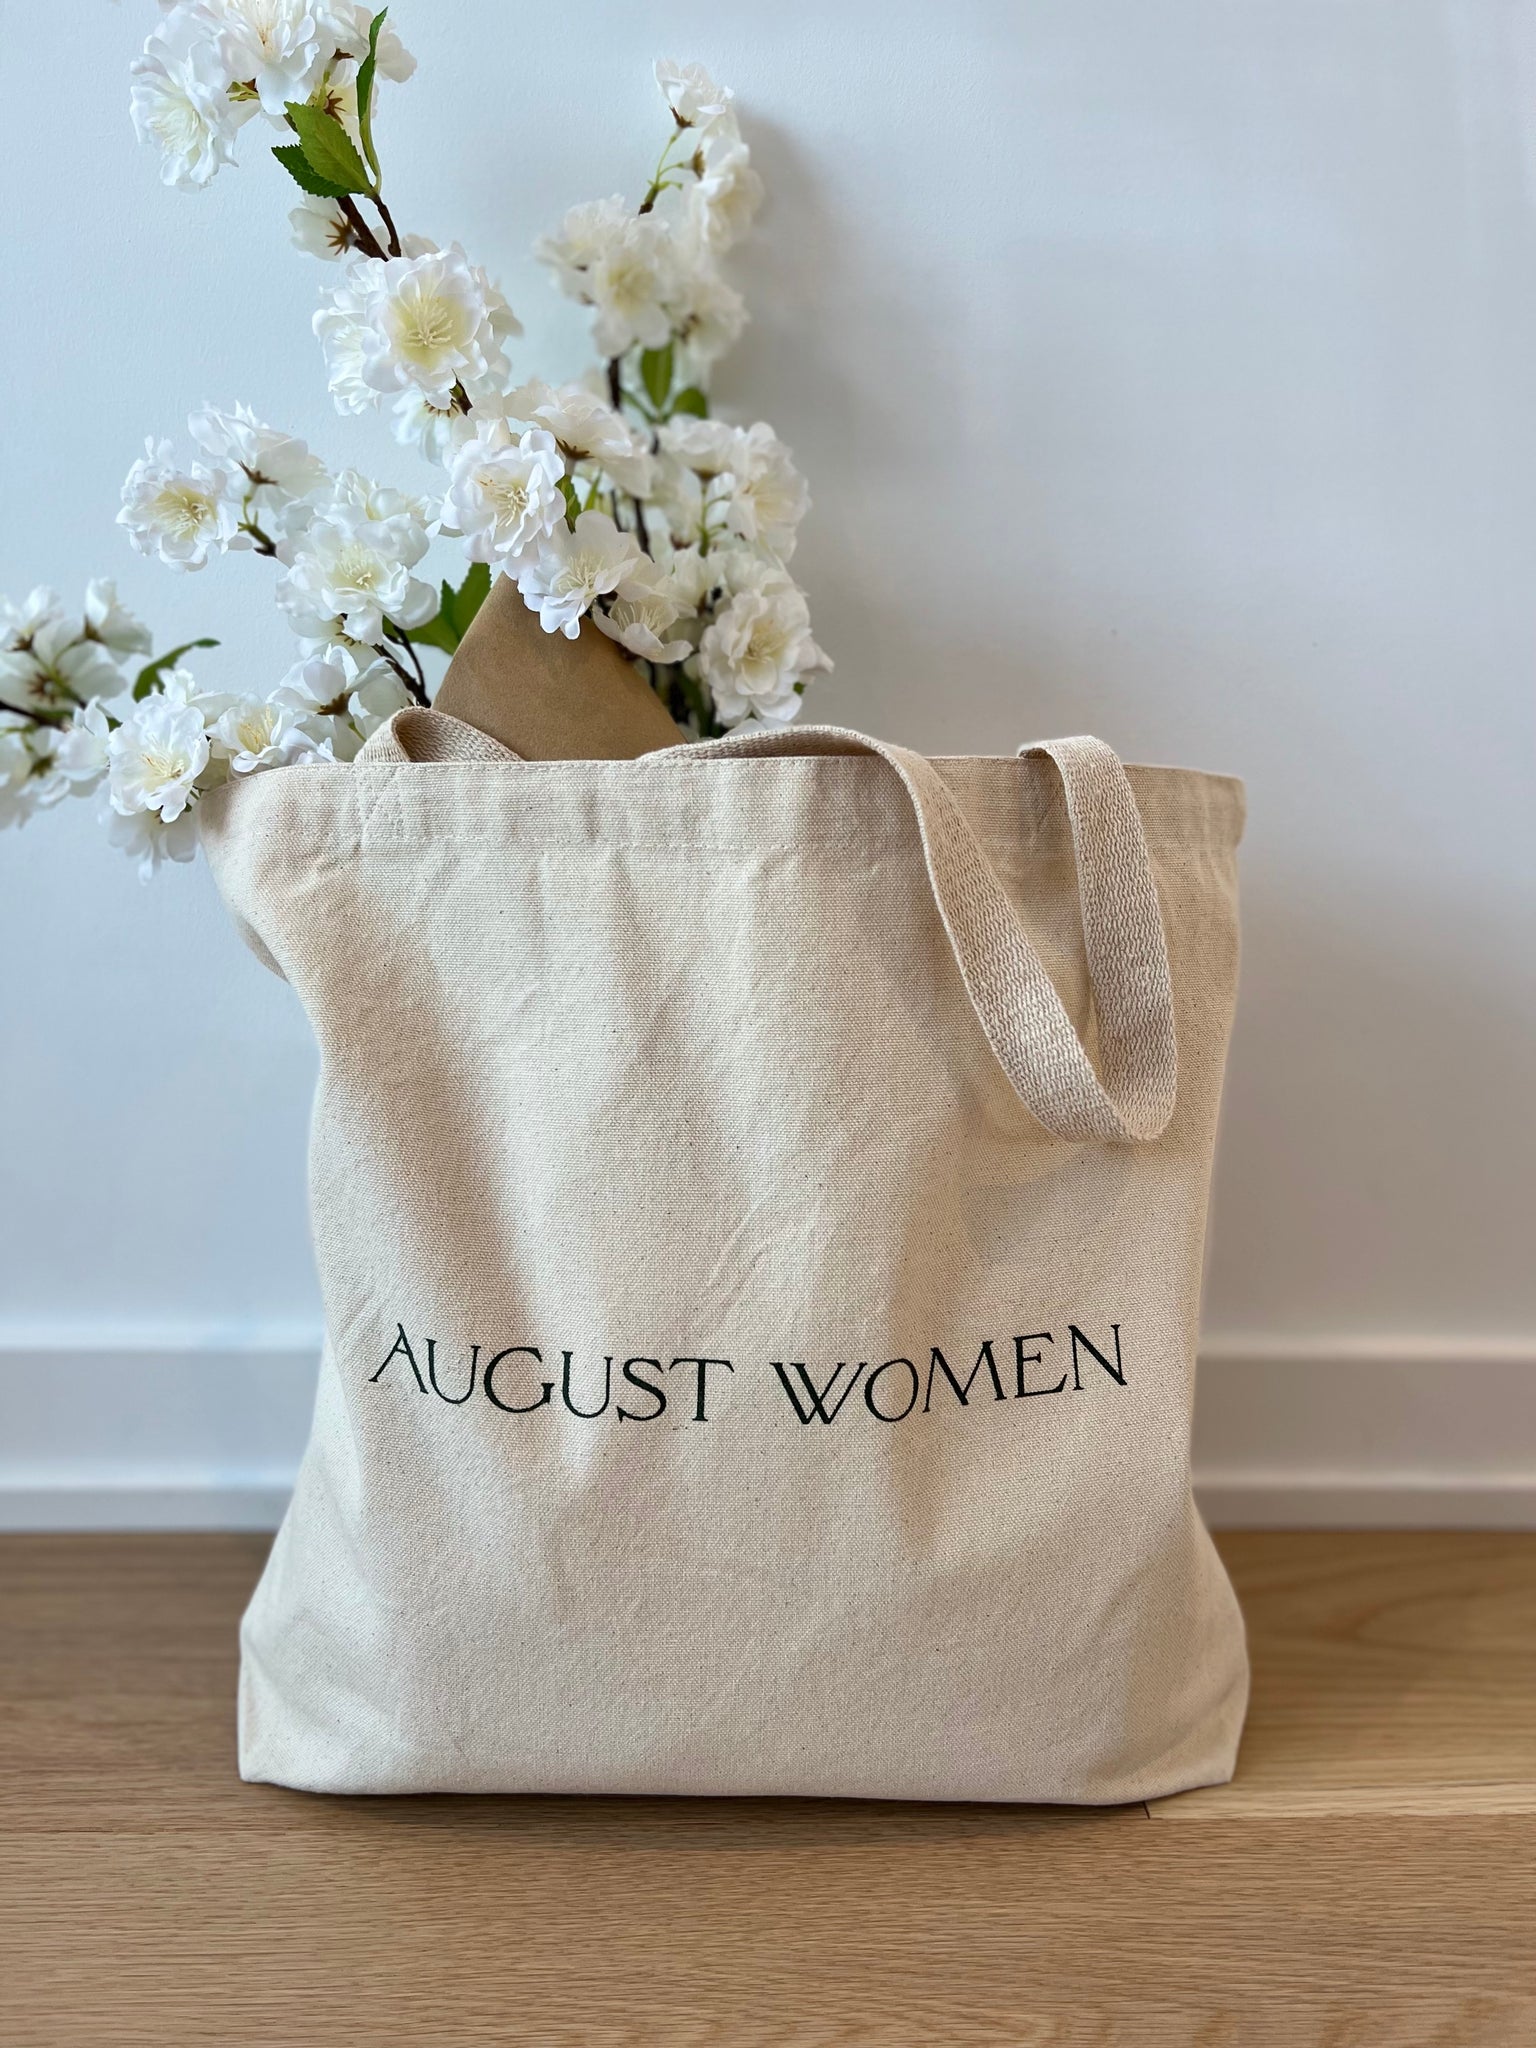 August Women Canvas Tote Bag